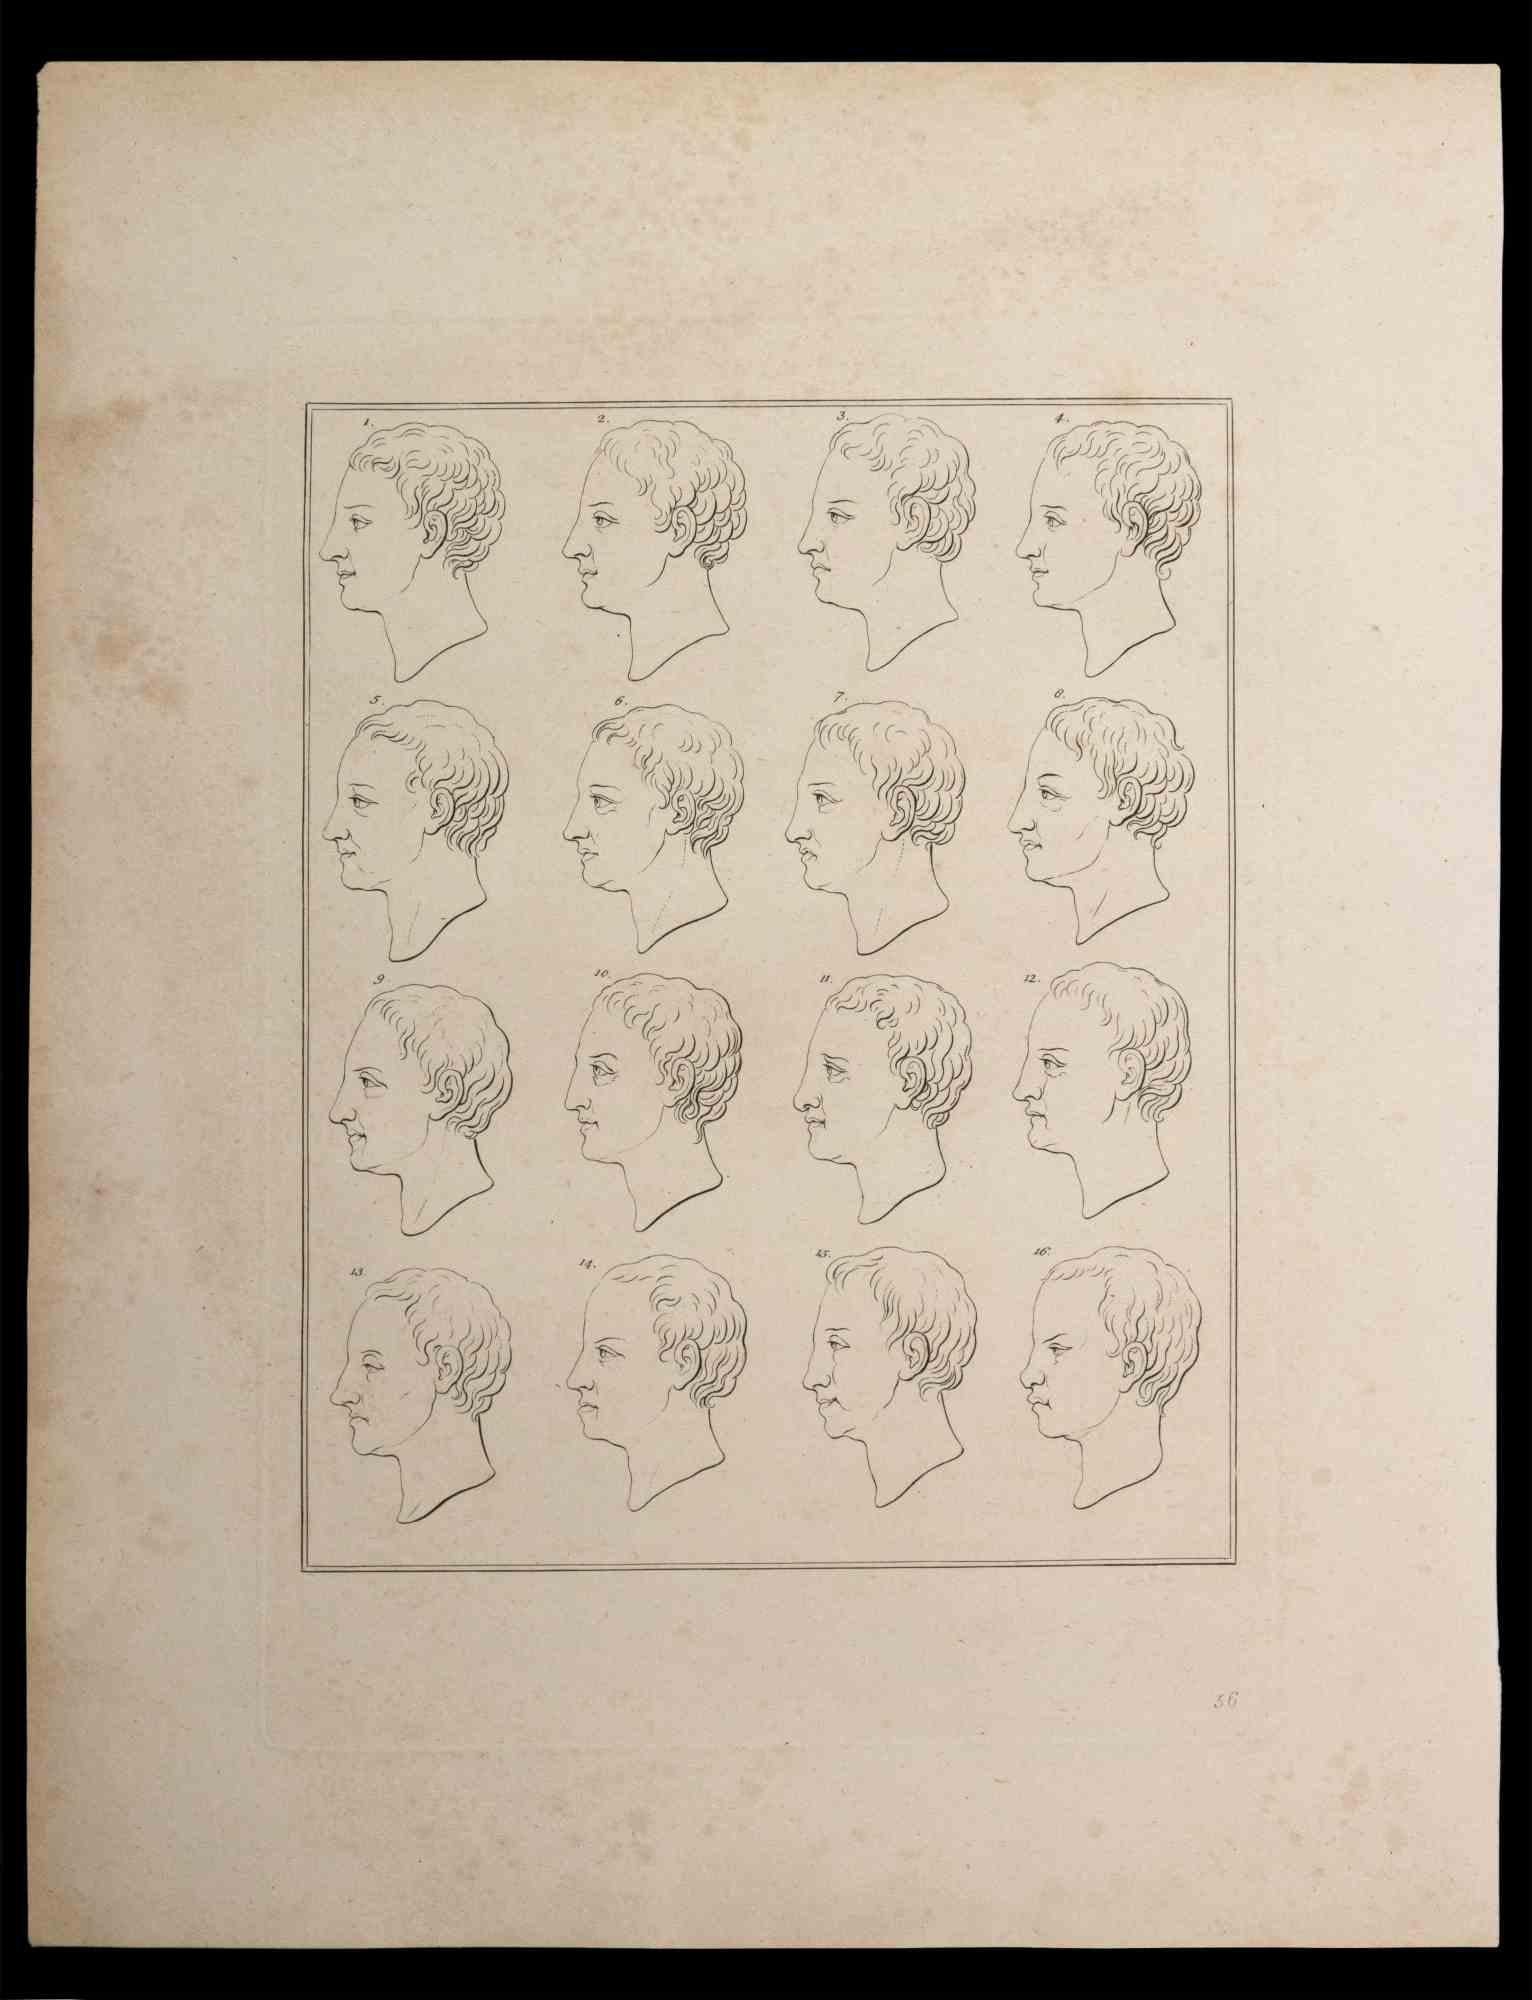 Profiles of man is an original etching artwork realized by Thomas Holloway for Johann Caspar Lavater's "Essays on Physiognomy, Designed to Promote the Knowledge and the Love of Mankind", London, Bensley, 1810. 

This artwork represents the profiles